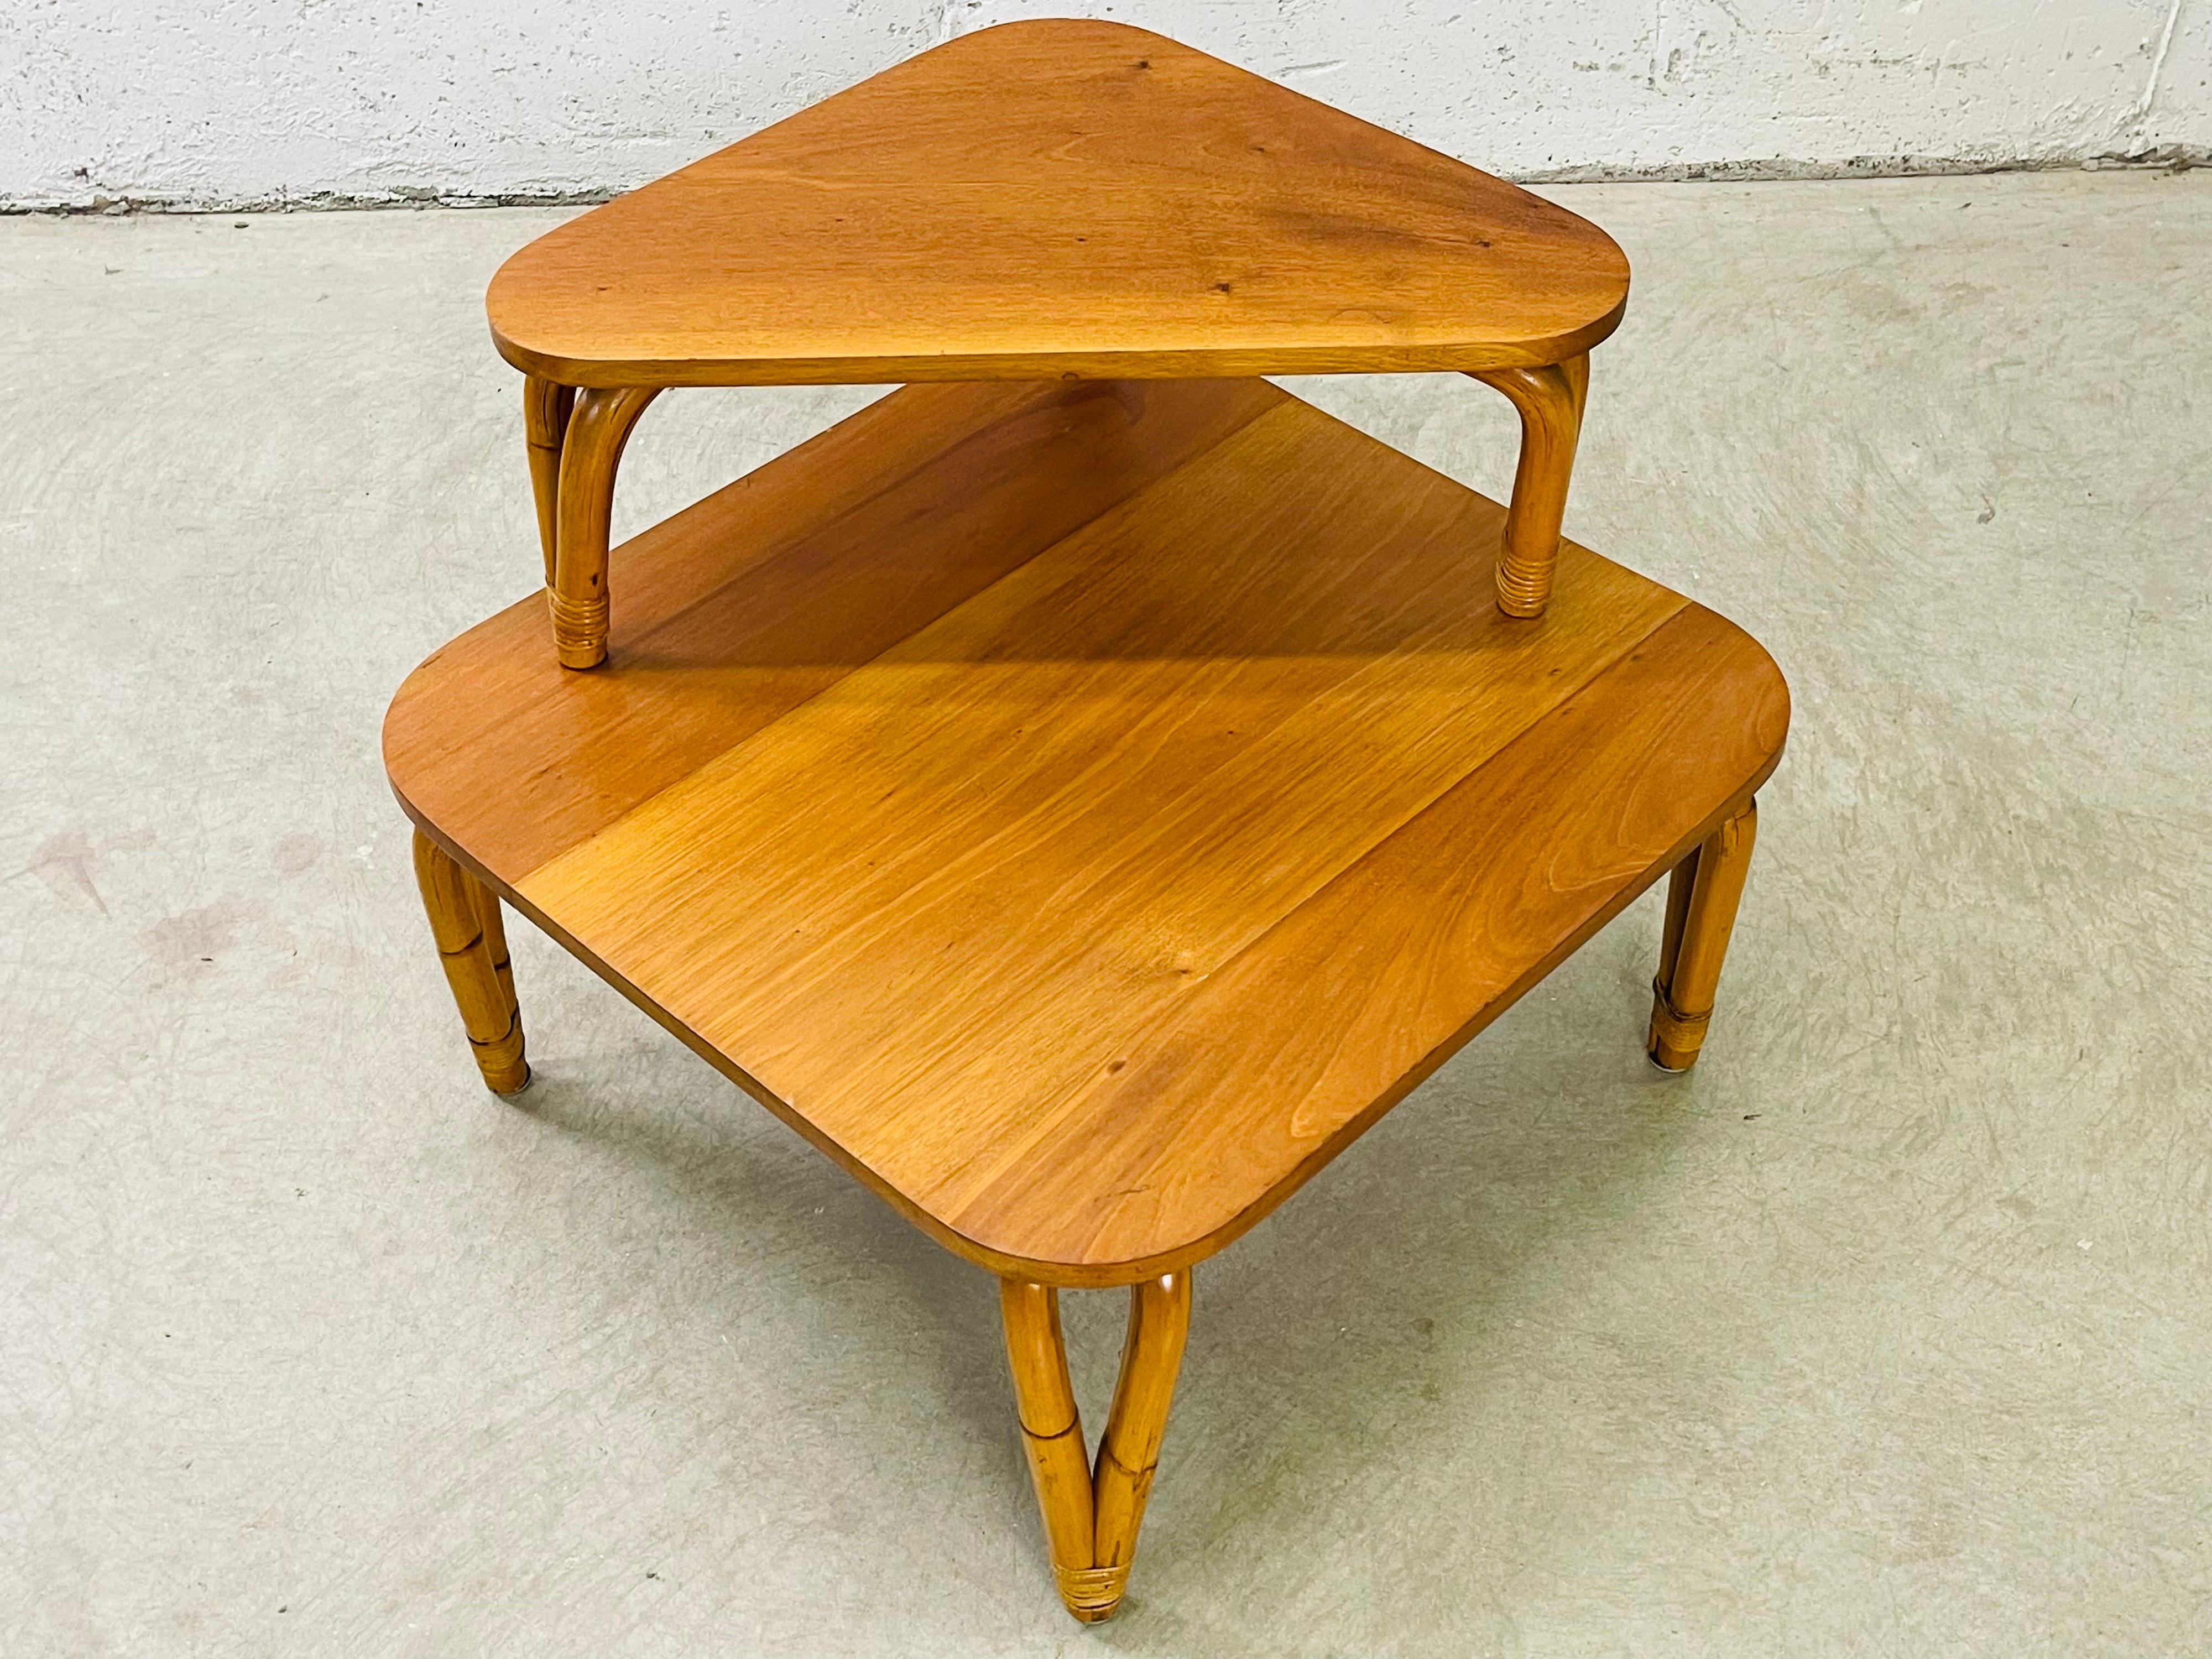 Vintage 1950s rattan and mahogany two tier corner table. The table is solid and sturdy with no breaks to the rattan. The first level is 14.5”H. No marks.